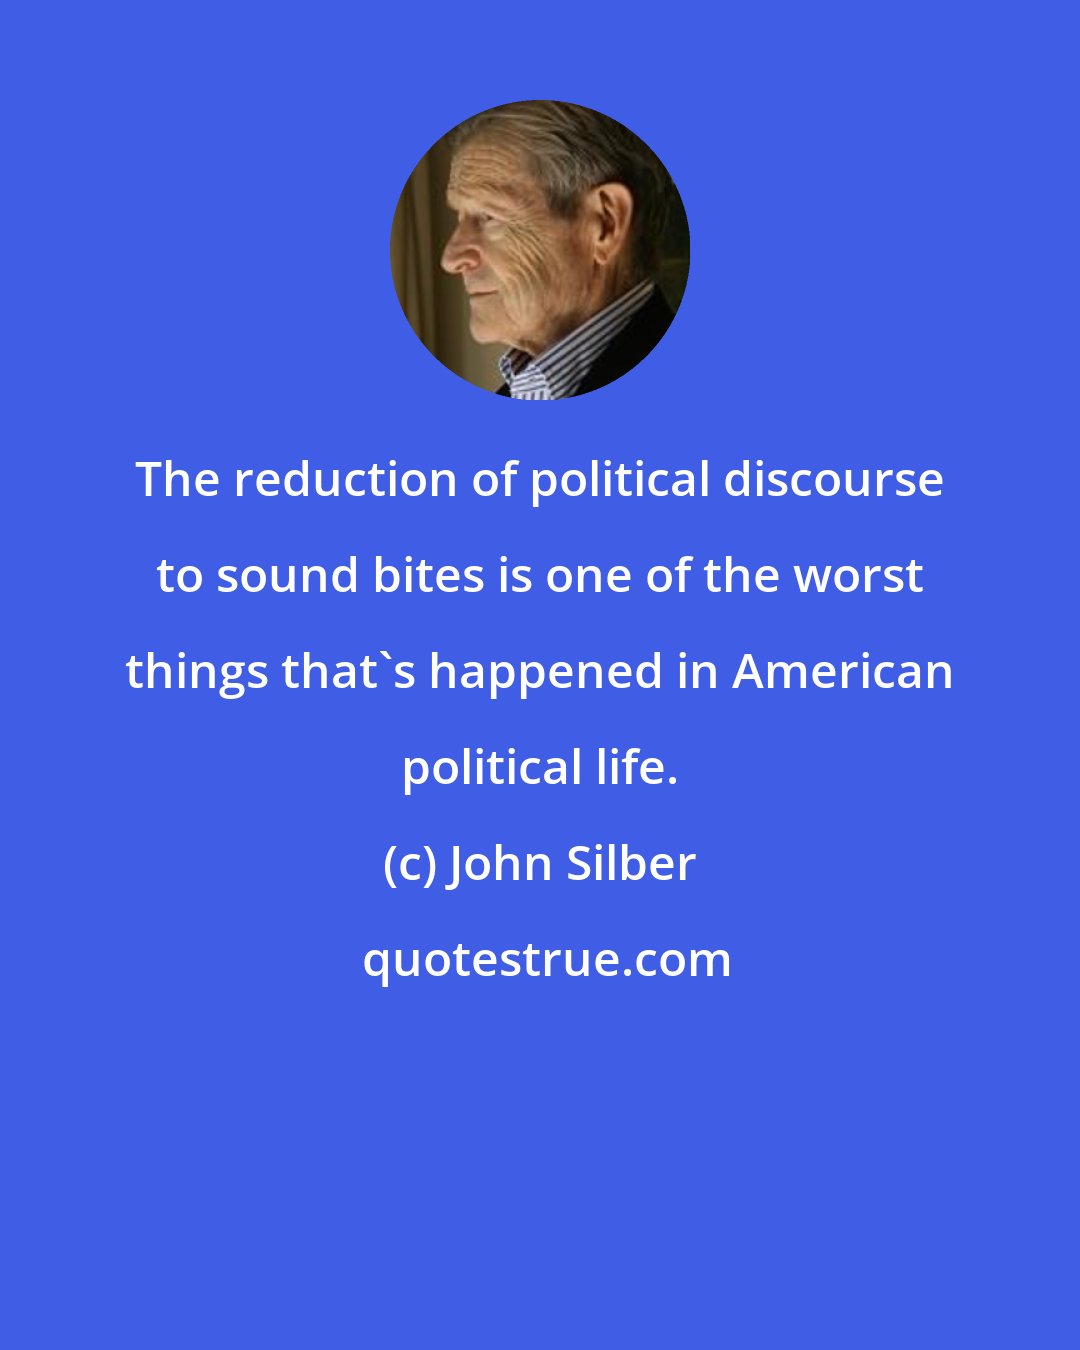 John Silber: The reduction of political discourse to sound bites is one of the worst things that's happened in American political life.